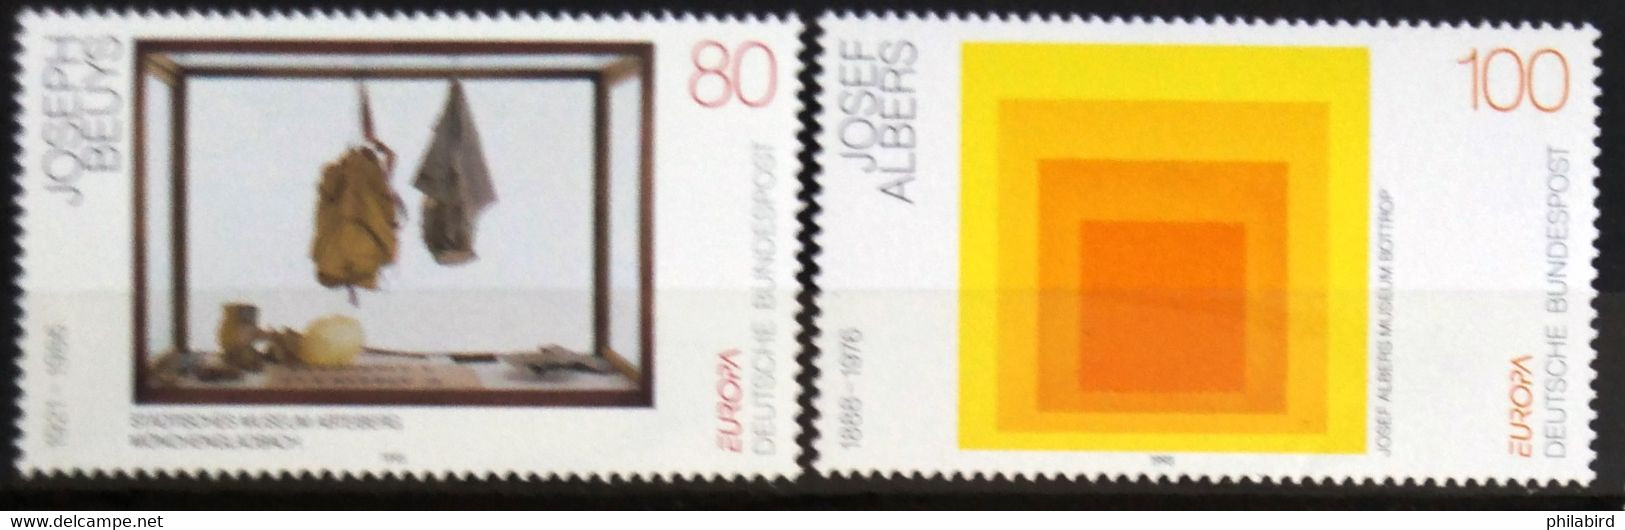 EUROPA 1993 - ALLEMAGNE                    N° 1504/1505                        NEUF* - 1993